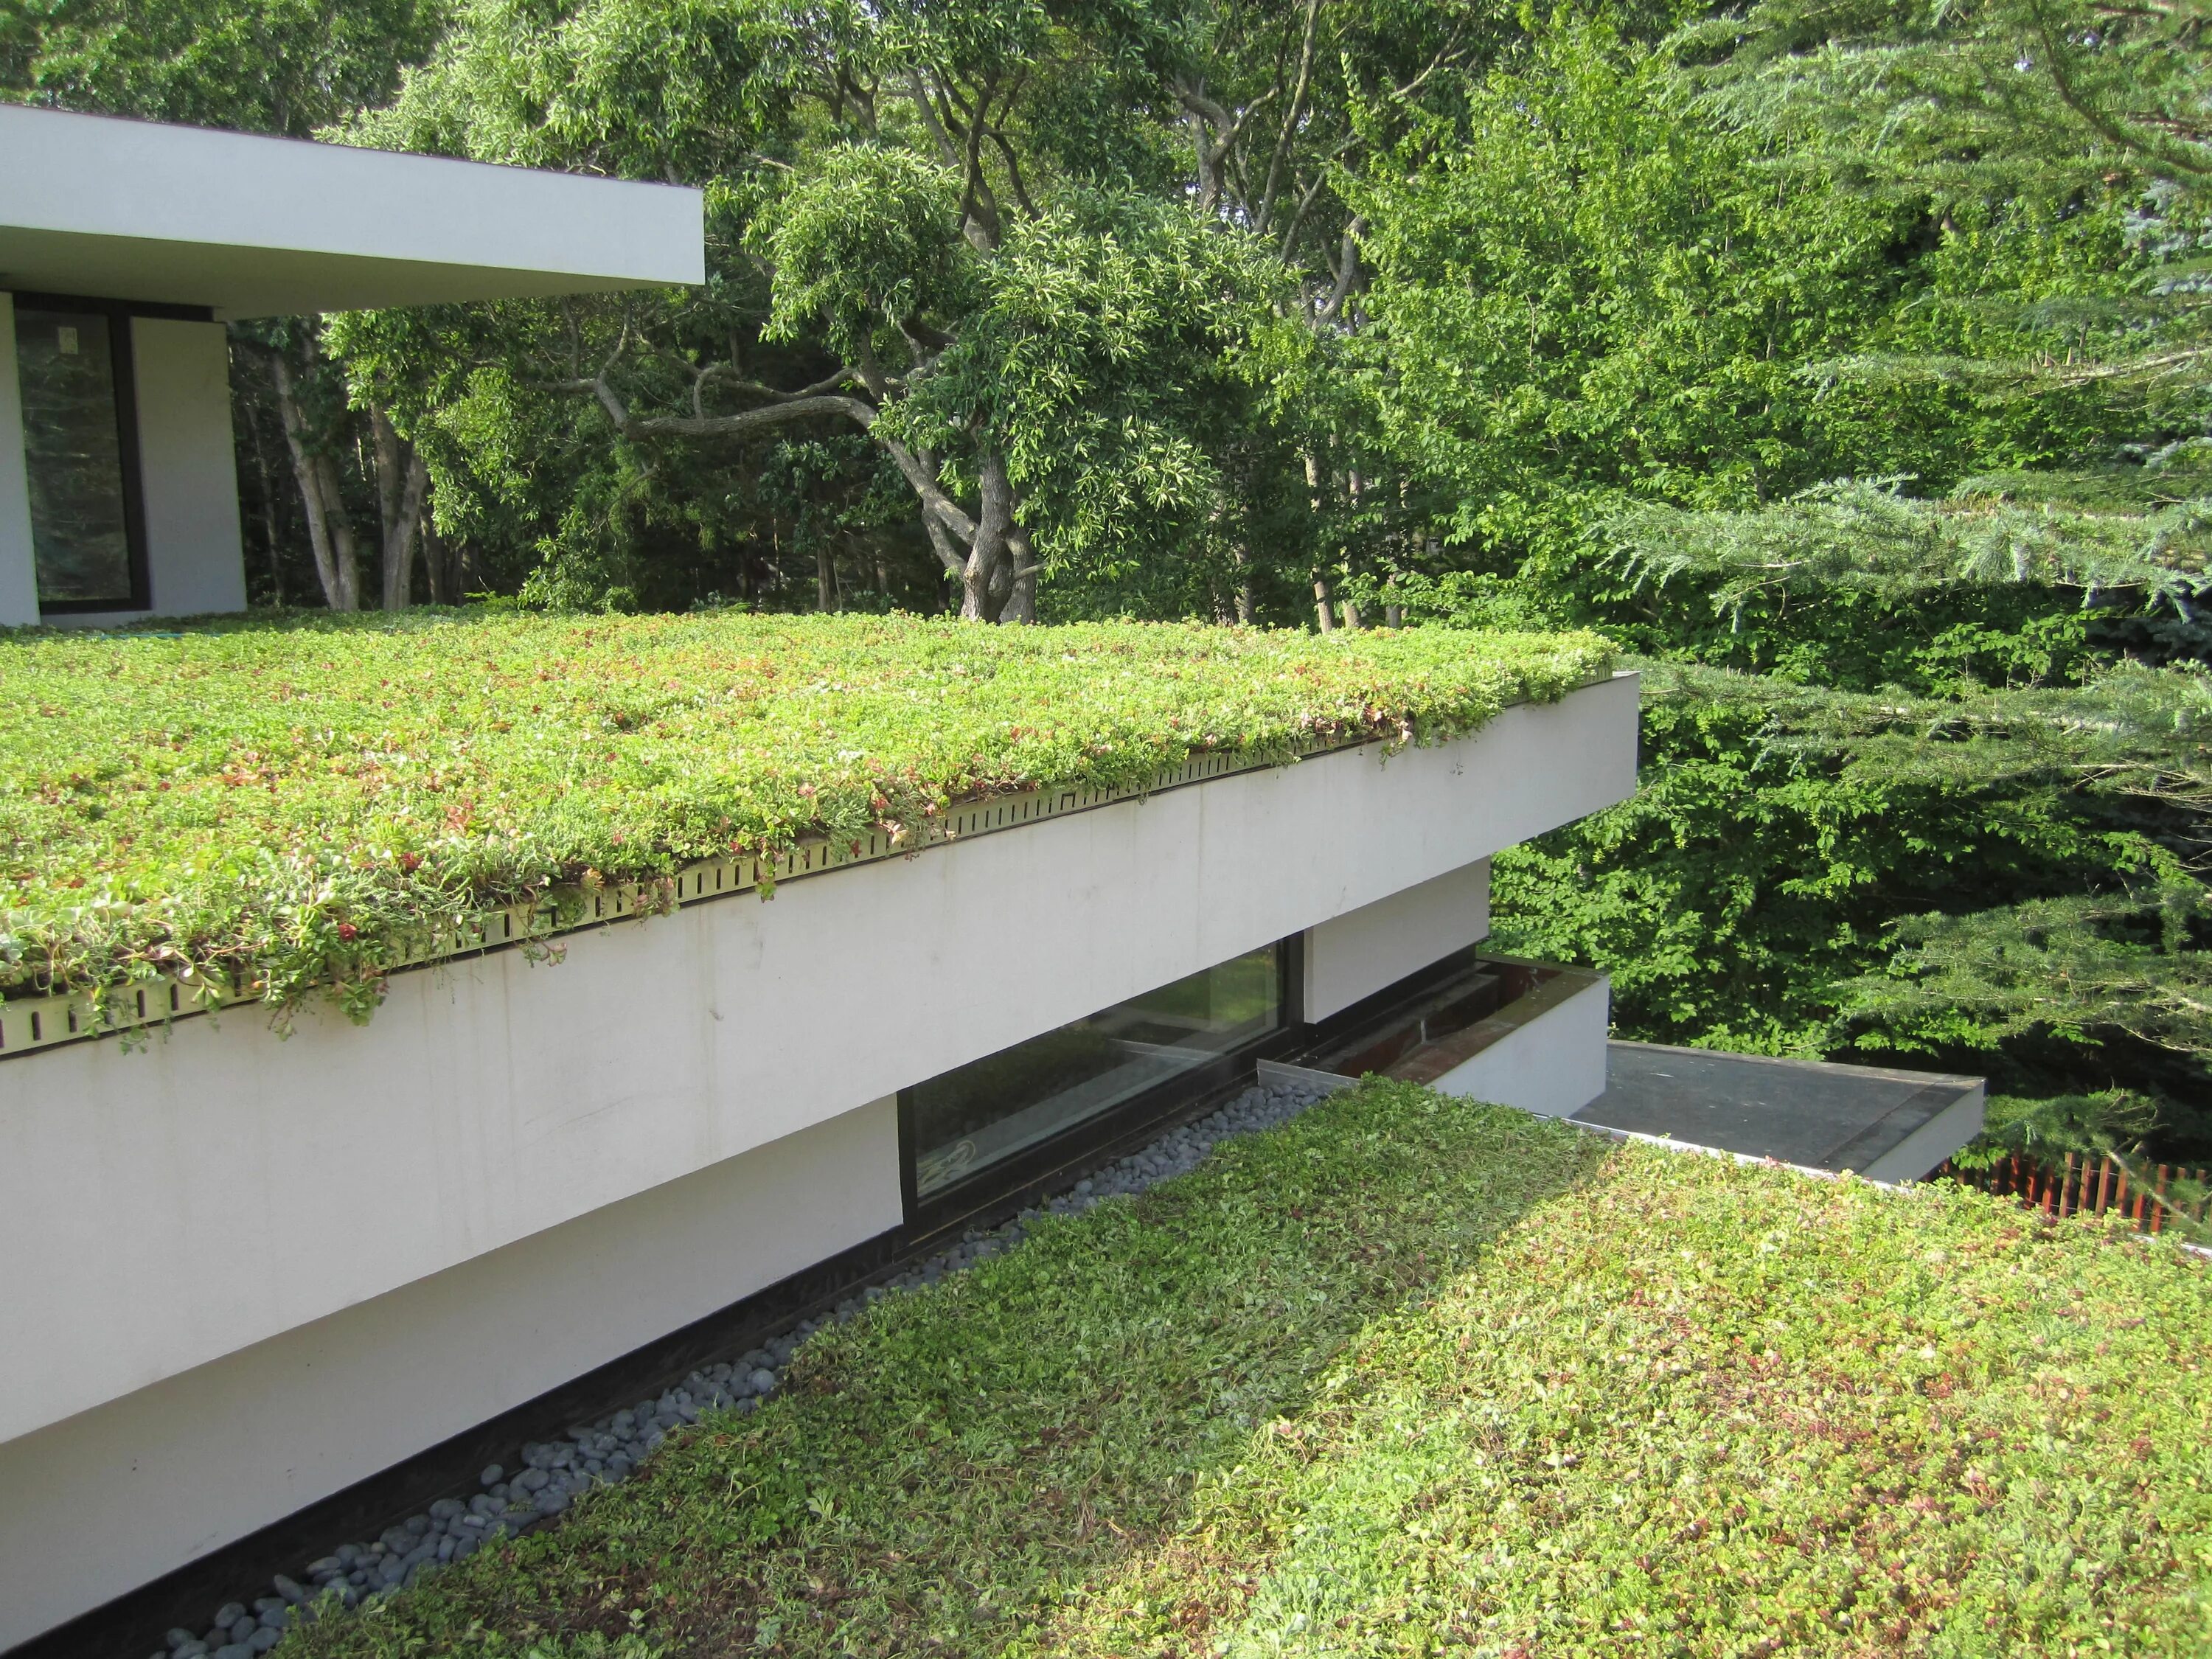 Green Roof. Green biotope Roofs. Vierhavenstrip Green Roof. Green Walls and Green Roofs Ecotechnologies.